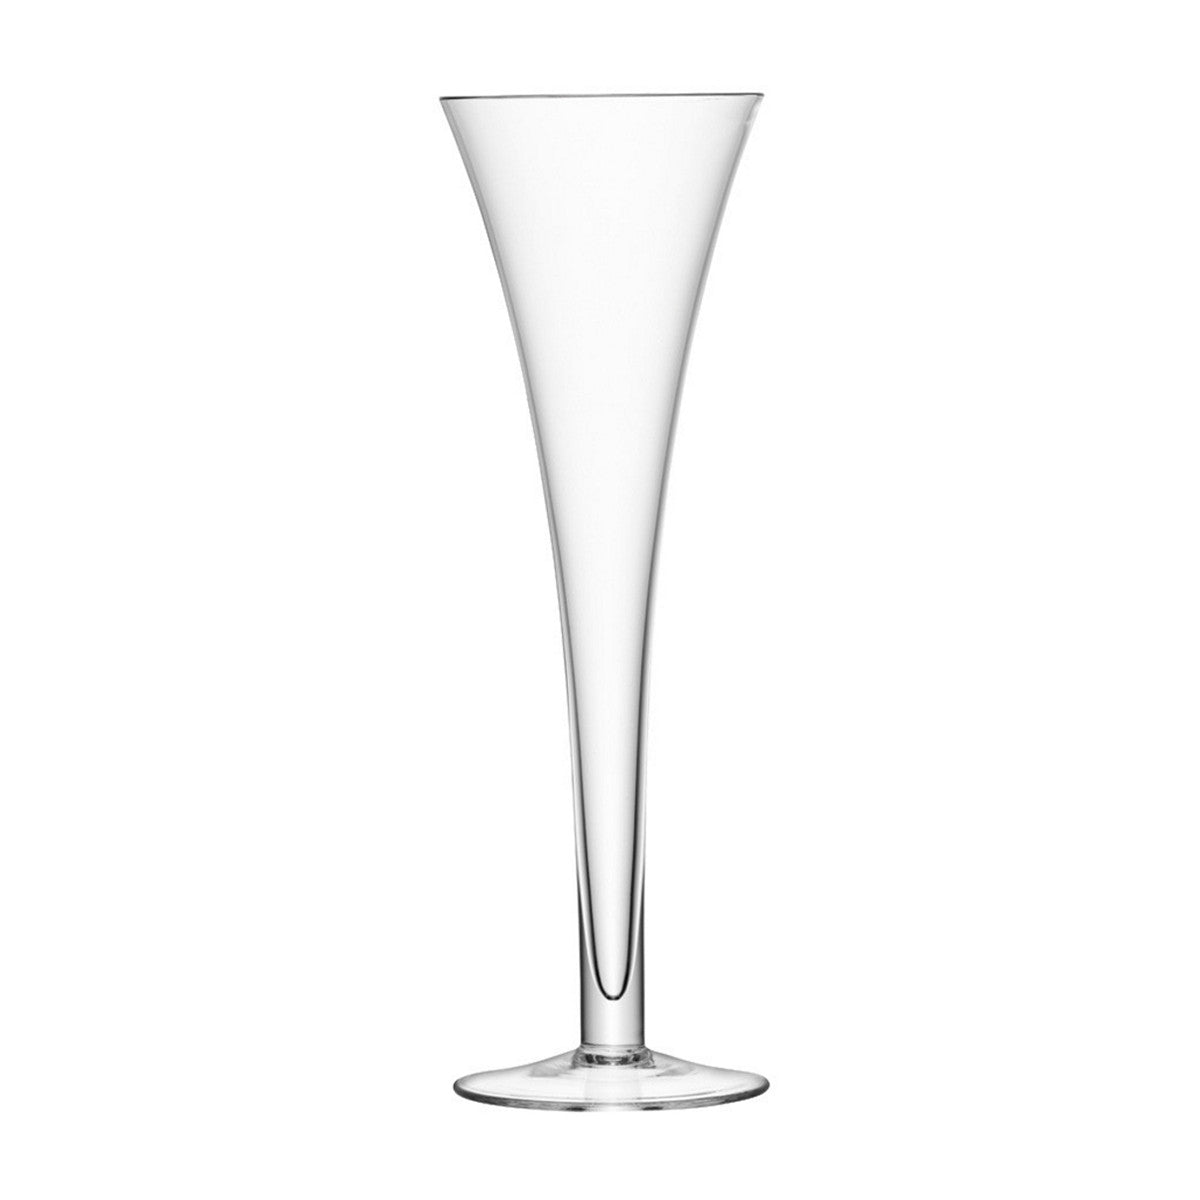 Pair of Hollow Stem Champagne Flutes